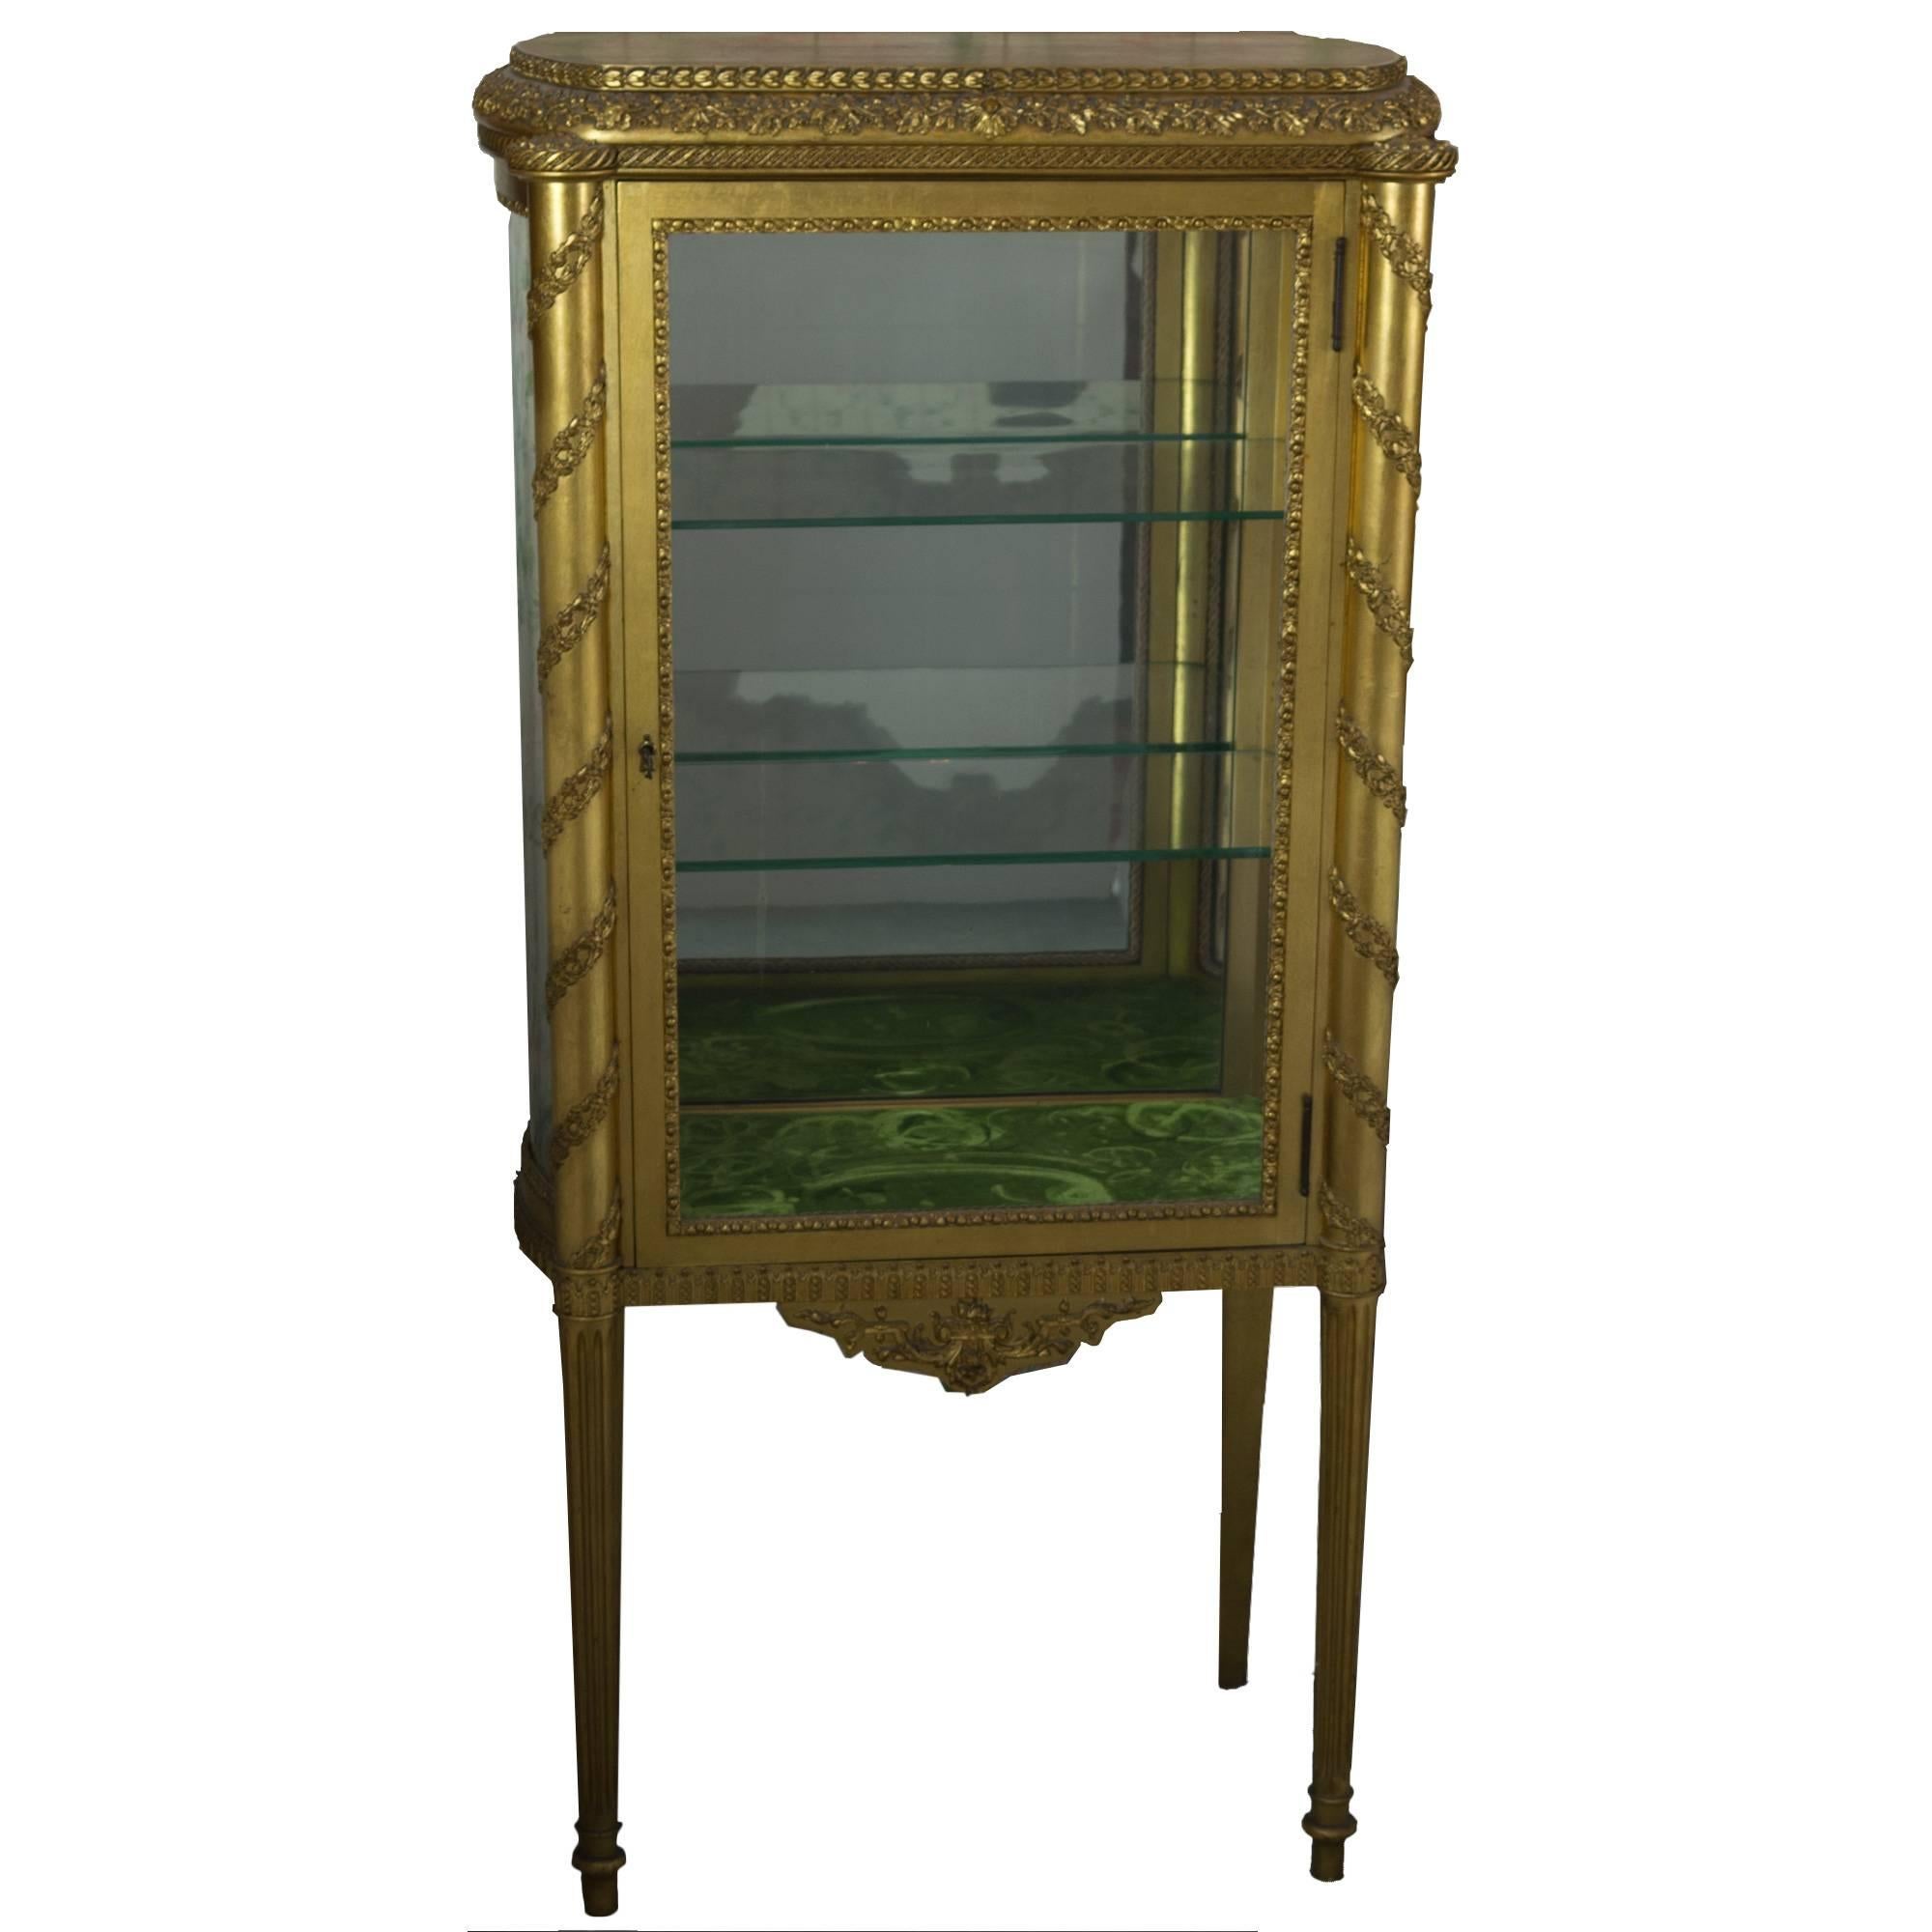 Small French Louis XVI Style Gold Giltwood Glass Vitrine Curio Cabinet